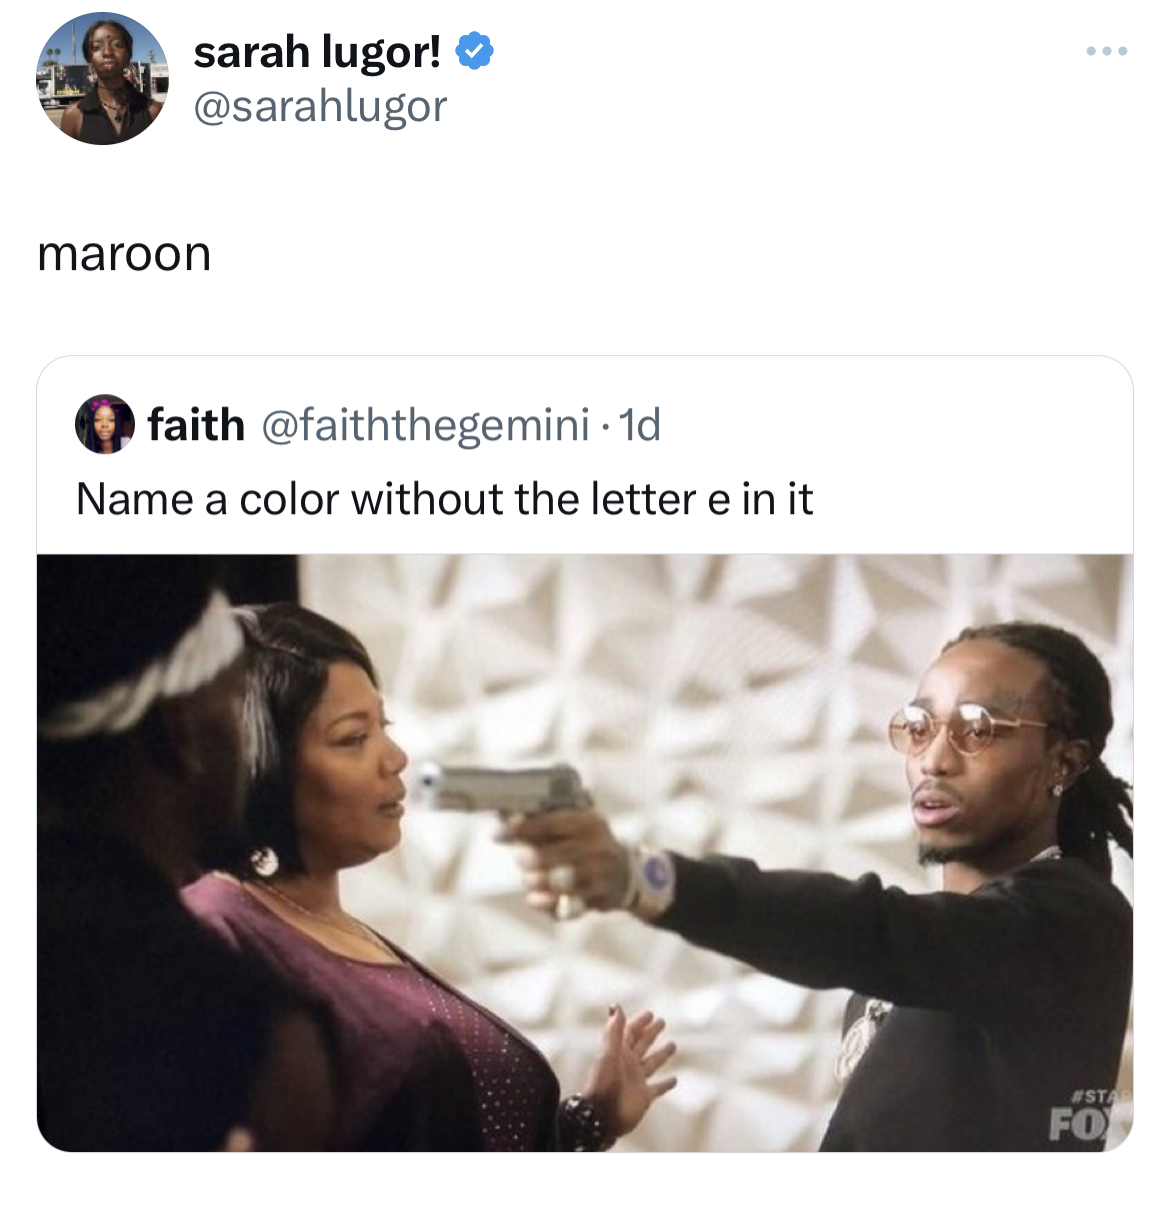 savage and salty tweets - quavo pointing gun - sarah lugor! maroon faith Name a color without the letter e in it www Esta Fo